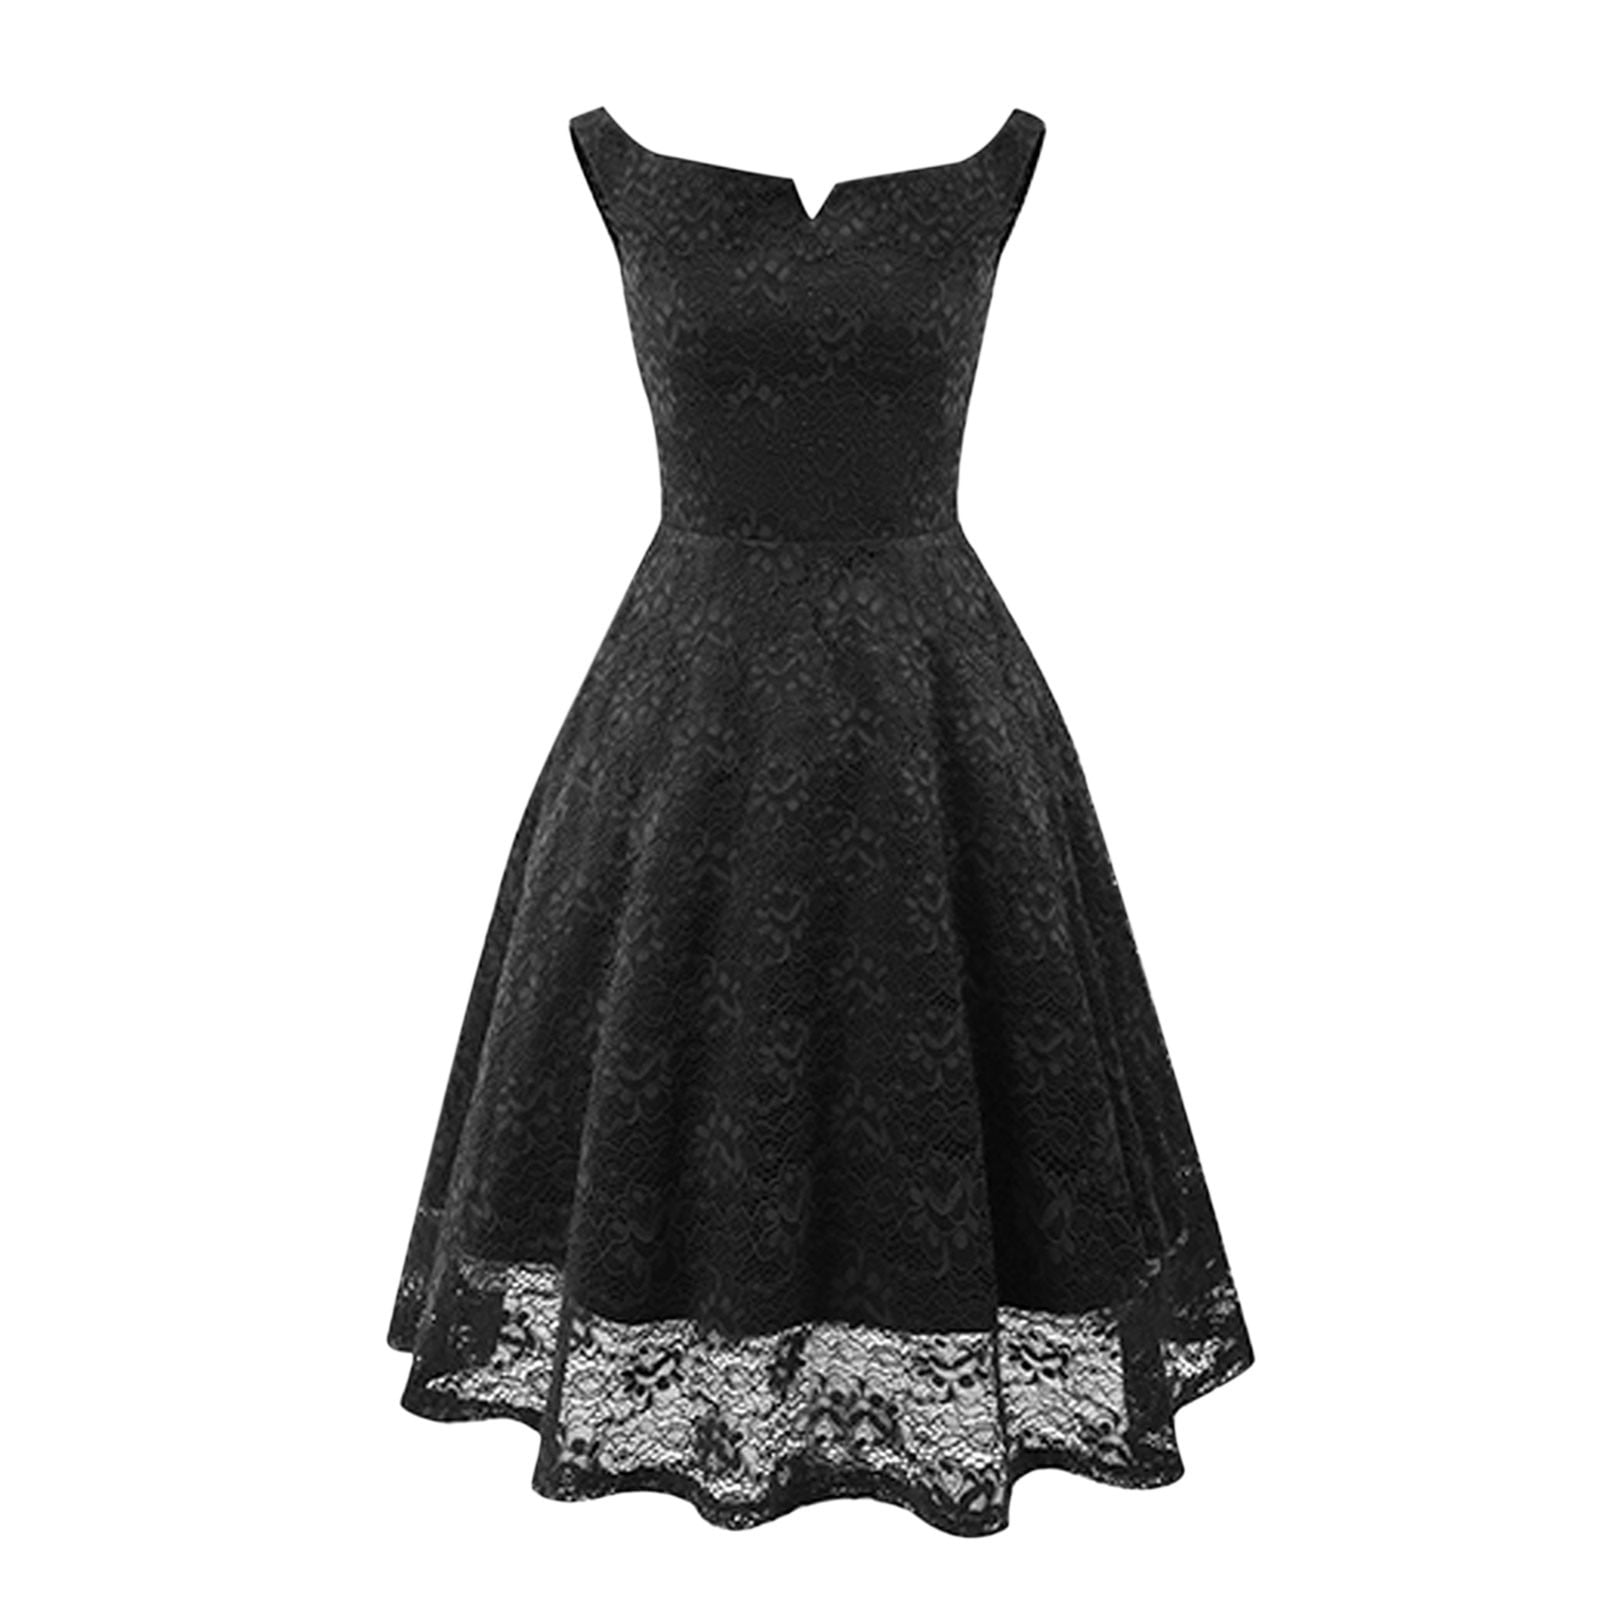 Women's Floral Lace Cocktail Dress Sleeveless A-Line Swing Formal Dress ...